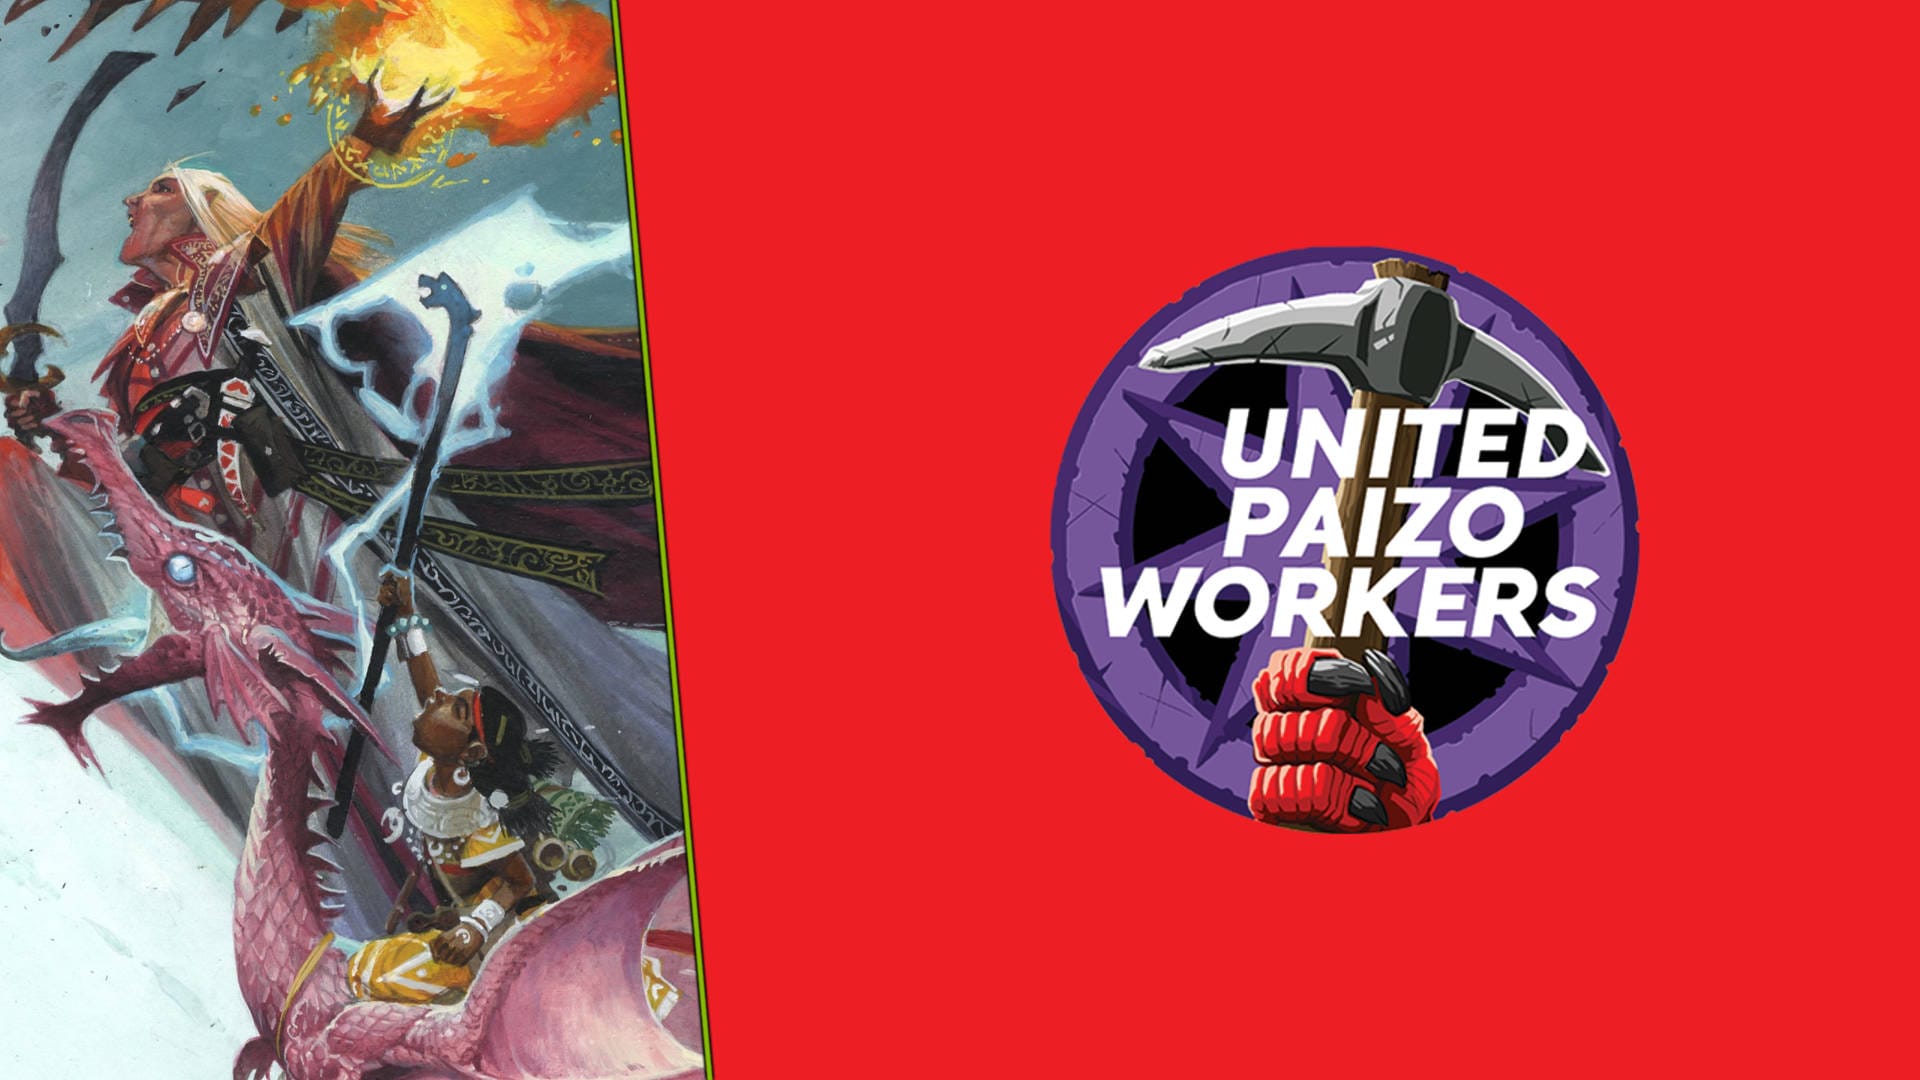 Paizo Union Formed United Paizo Workers cover